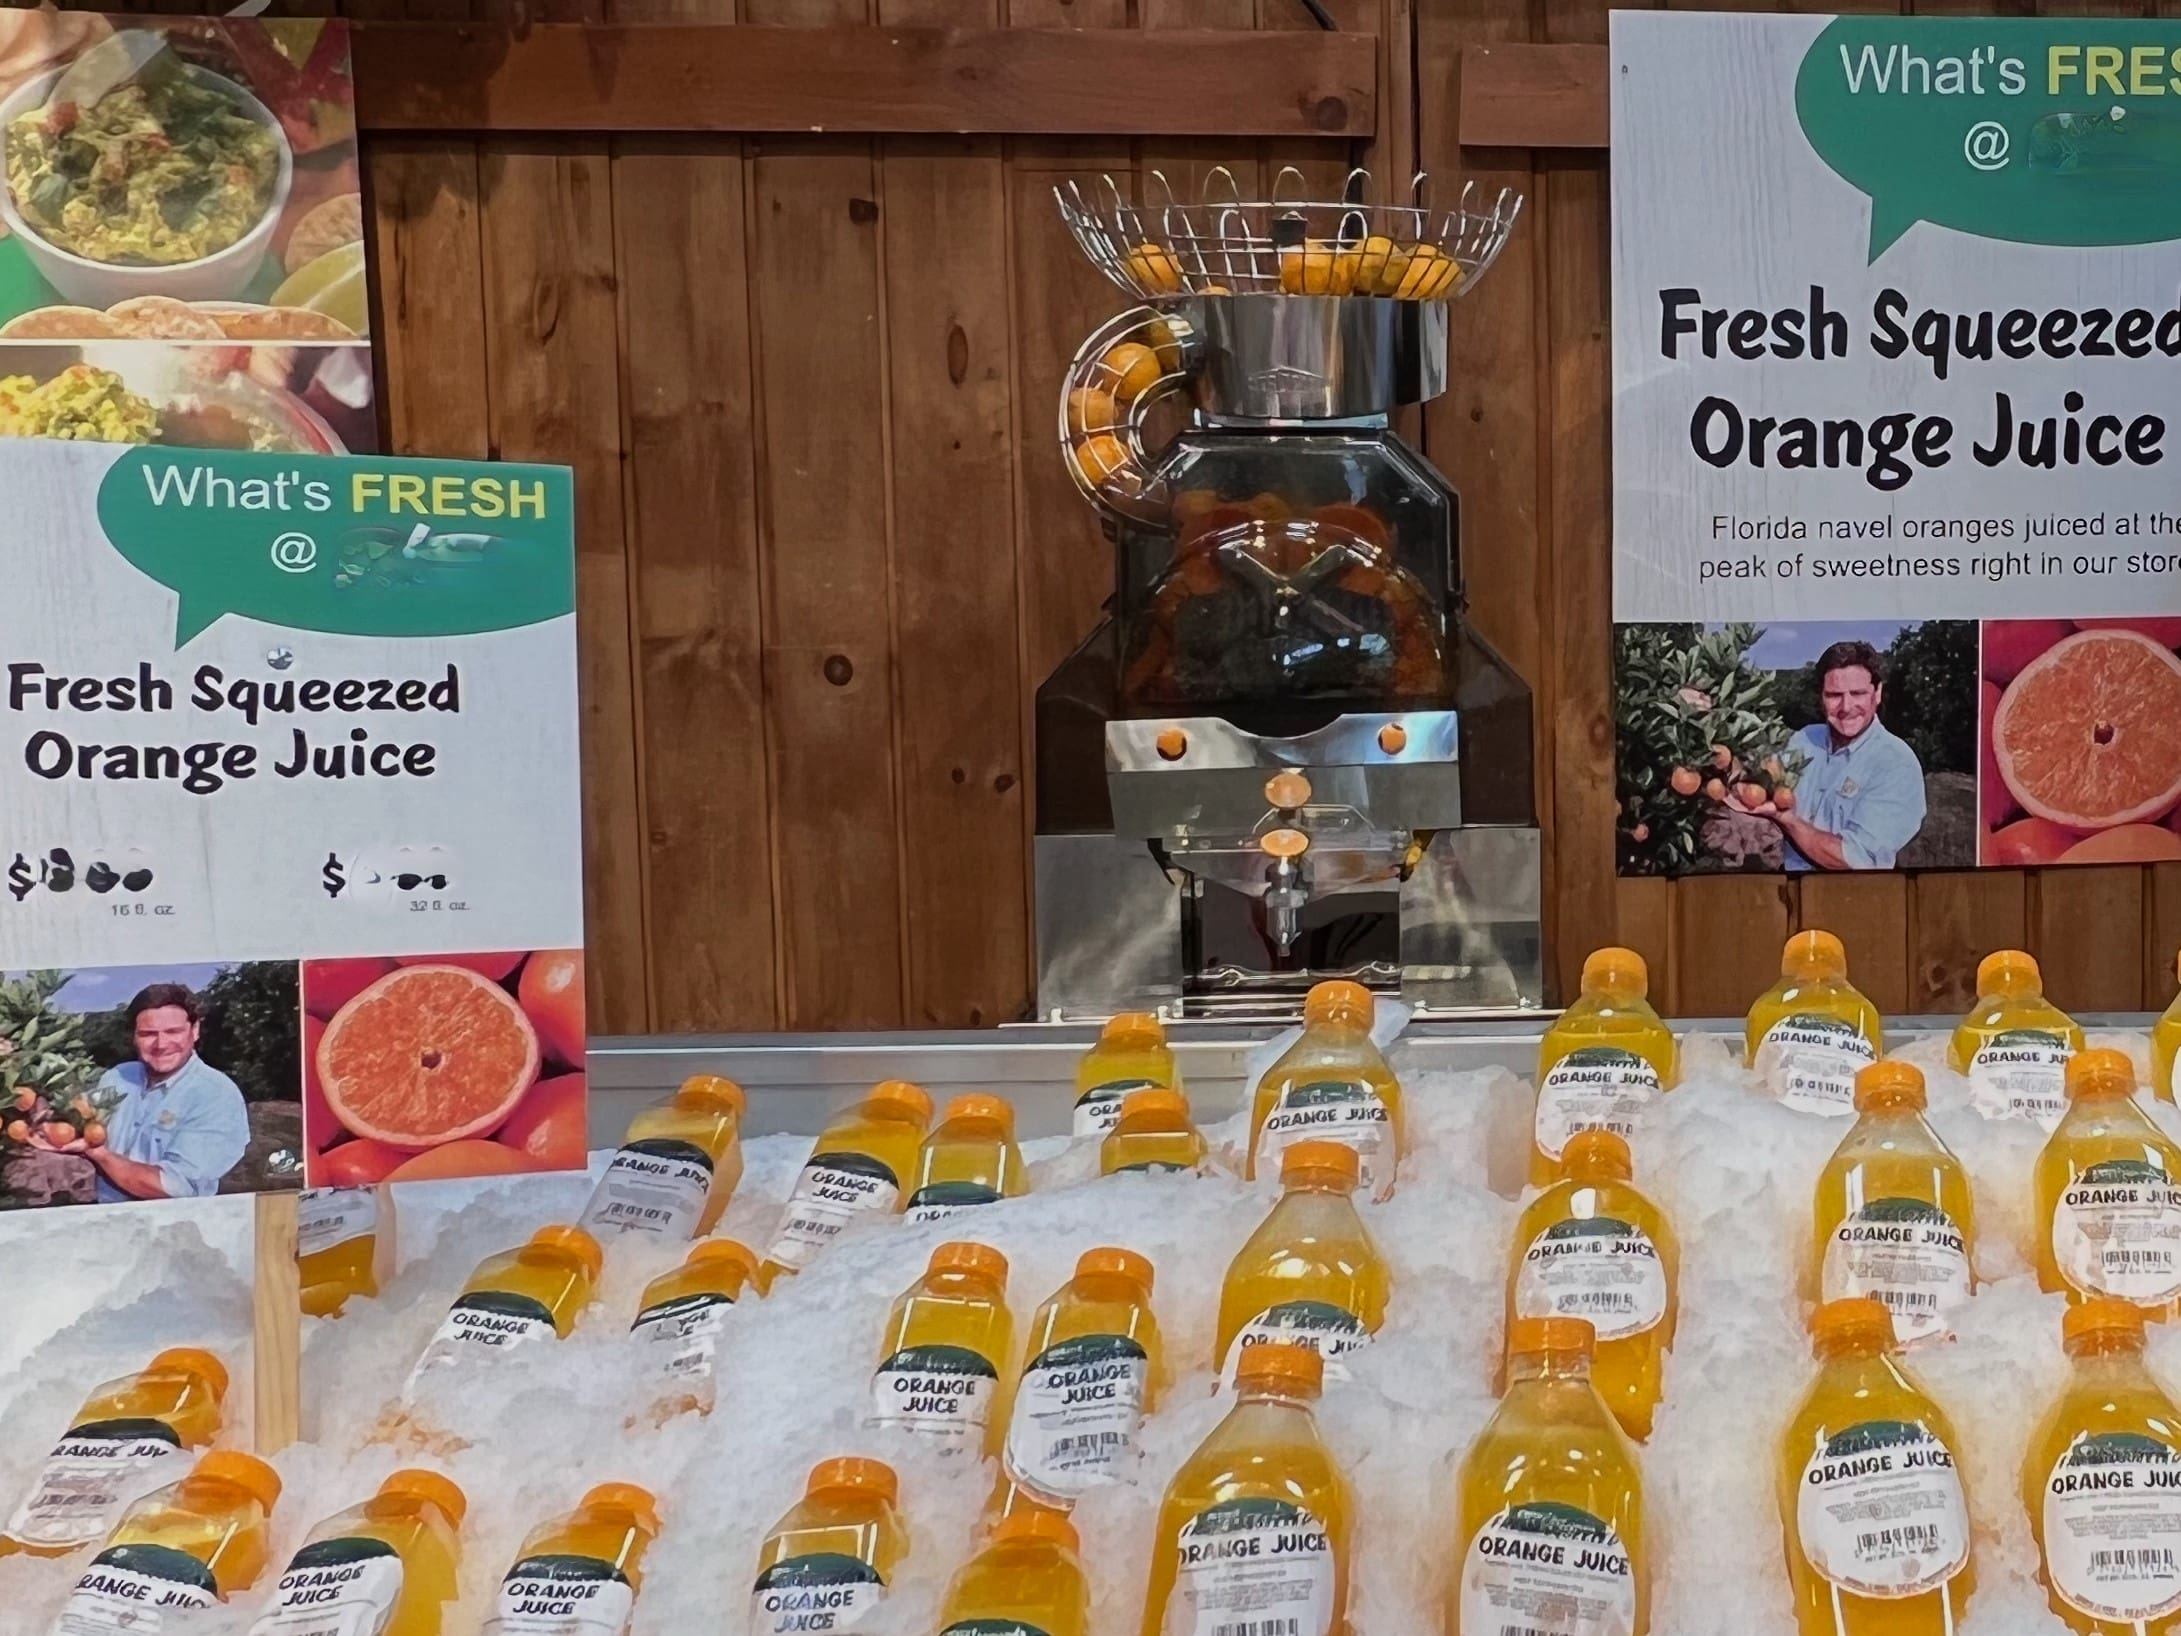 A market display features bottles of fresh squeezed orange juice on ice. Behind the bottles is a commercial juicer, ensuring each sip bursts with citrus freshness. Signs read "Fresh Squeezed Orange Juice," highlight the Florida navel oranges used, and show a person enjoying their drink.